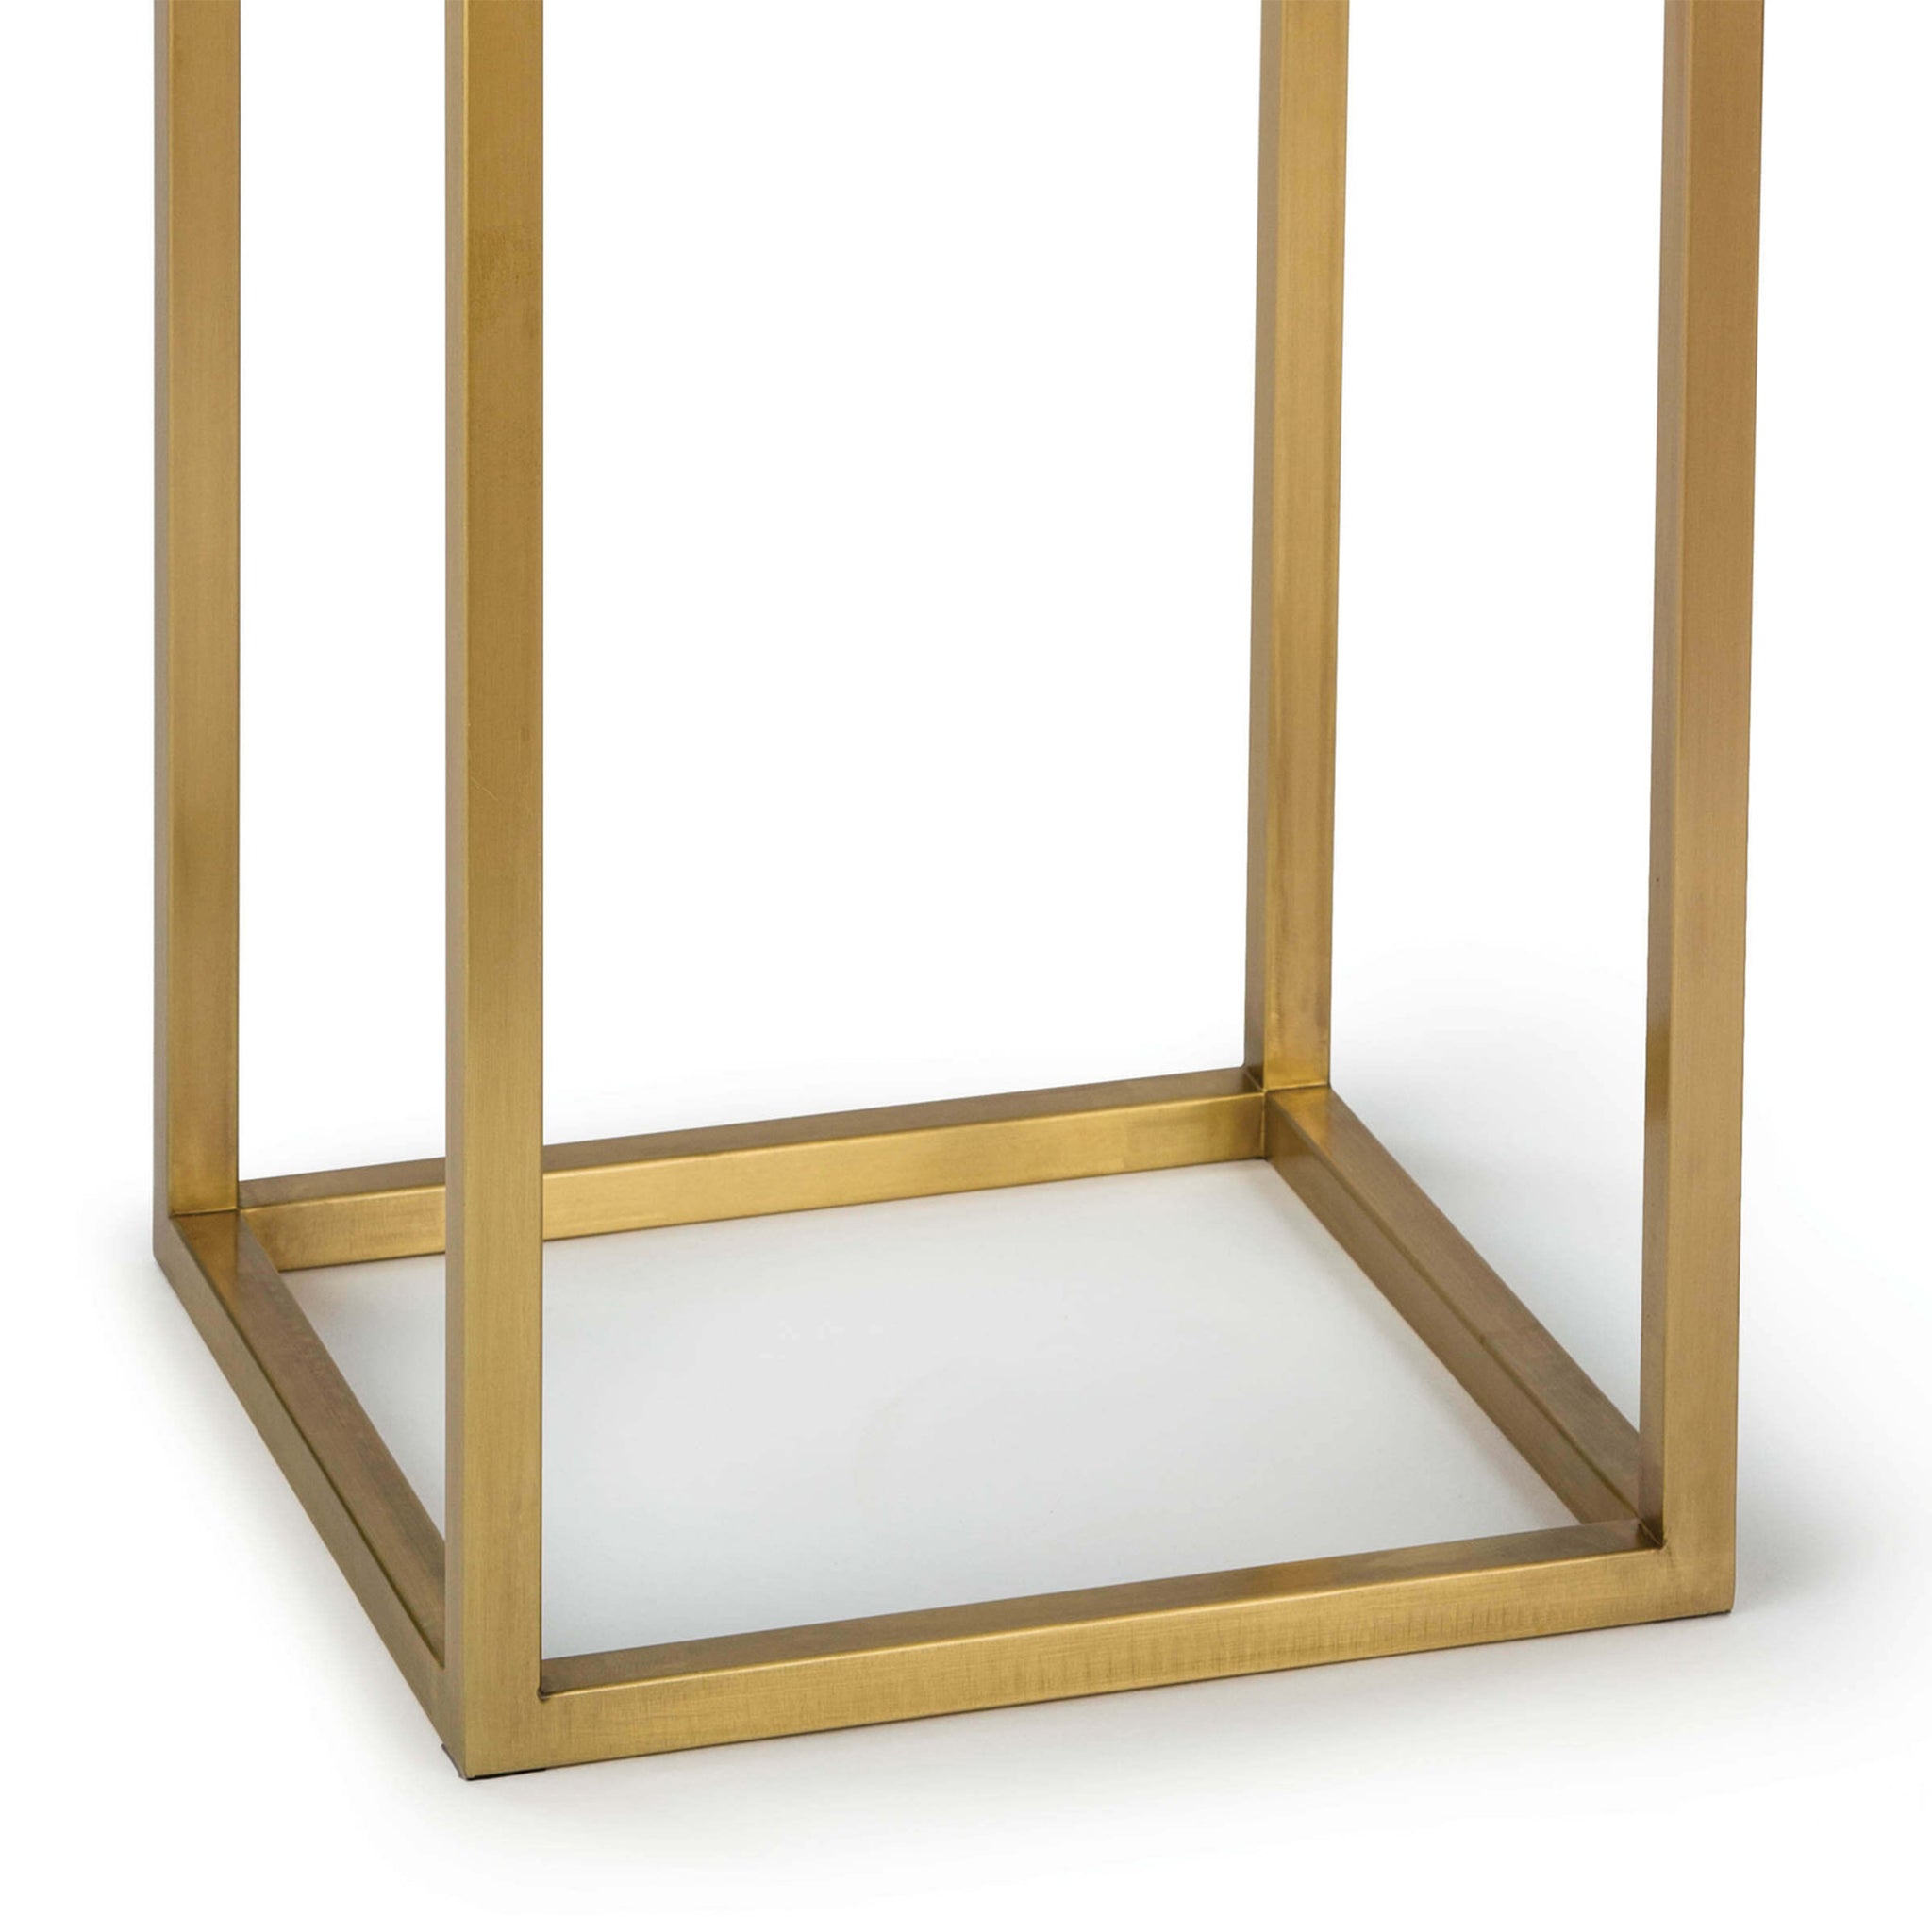 regina andrew sawyer accent table natural brass end tables 